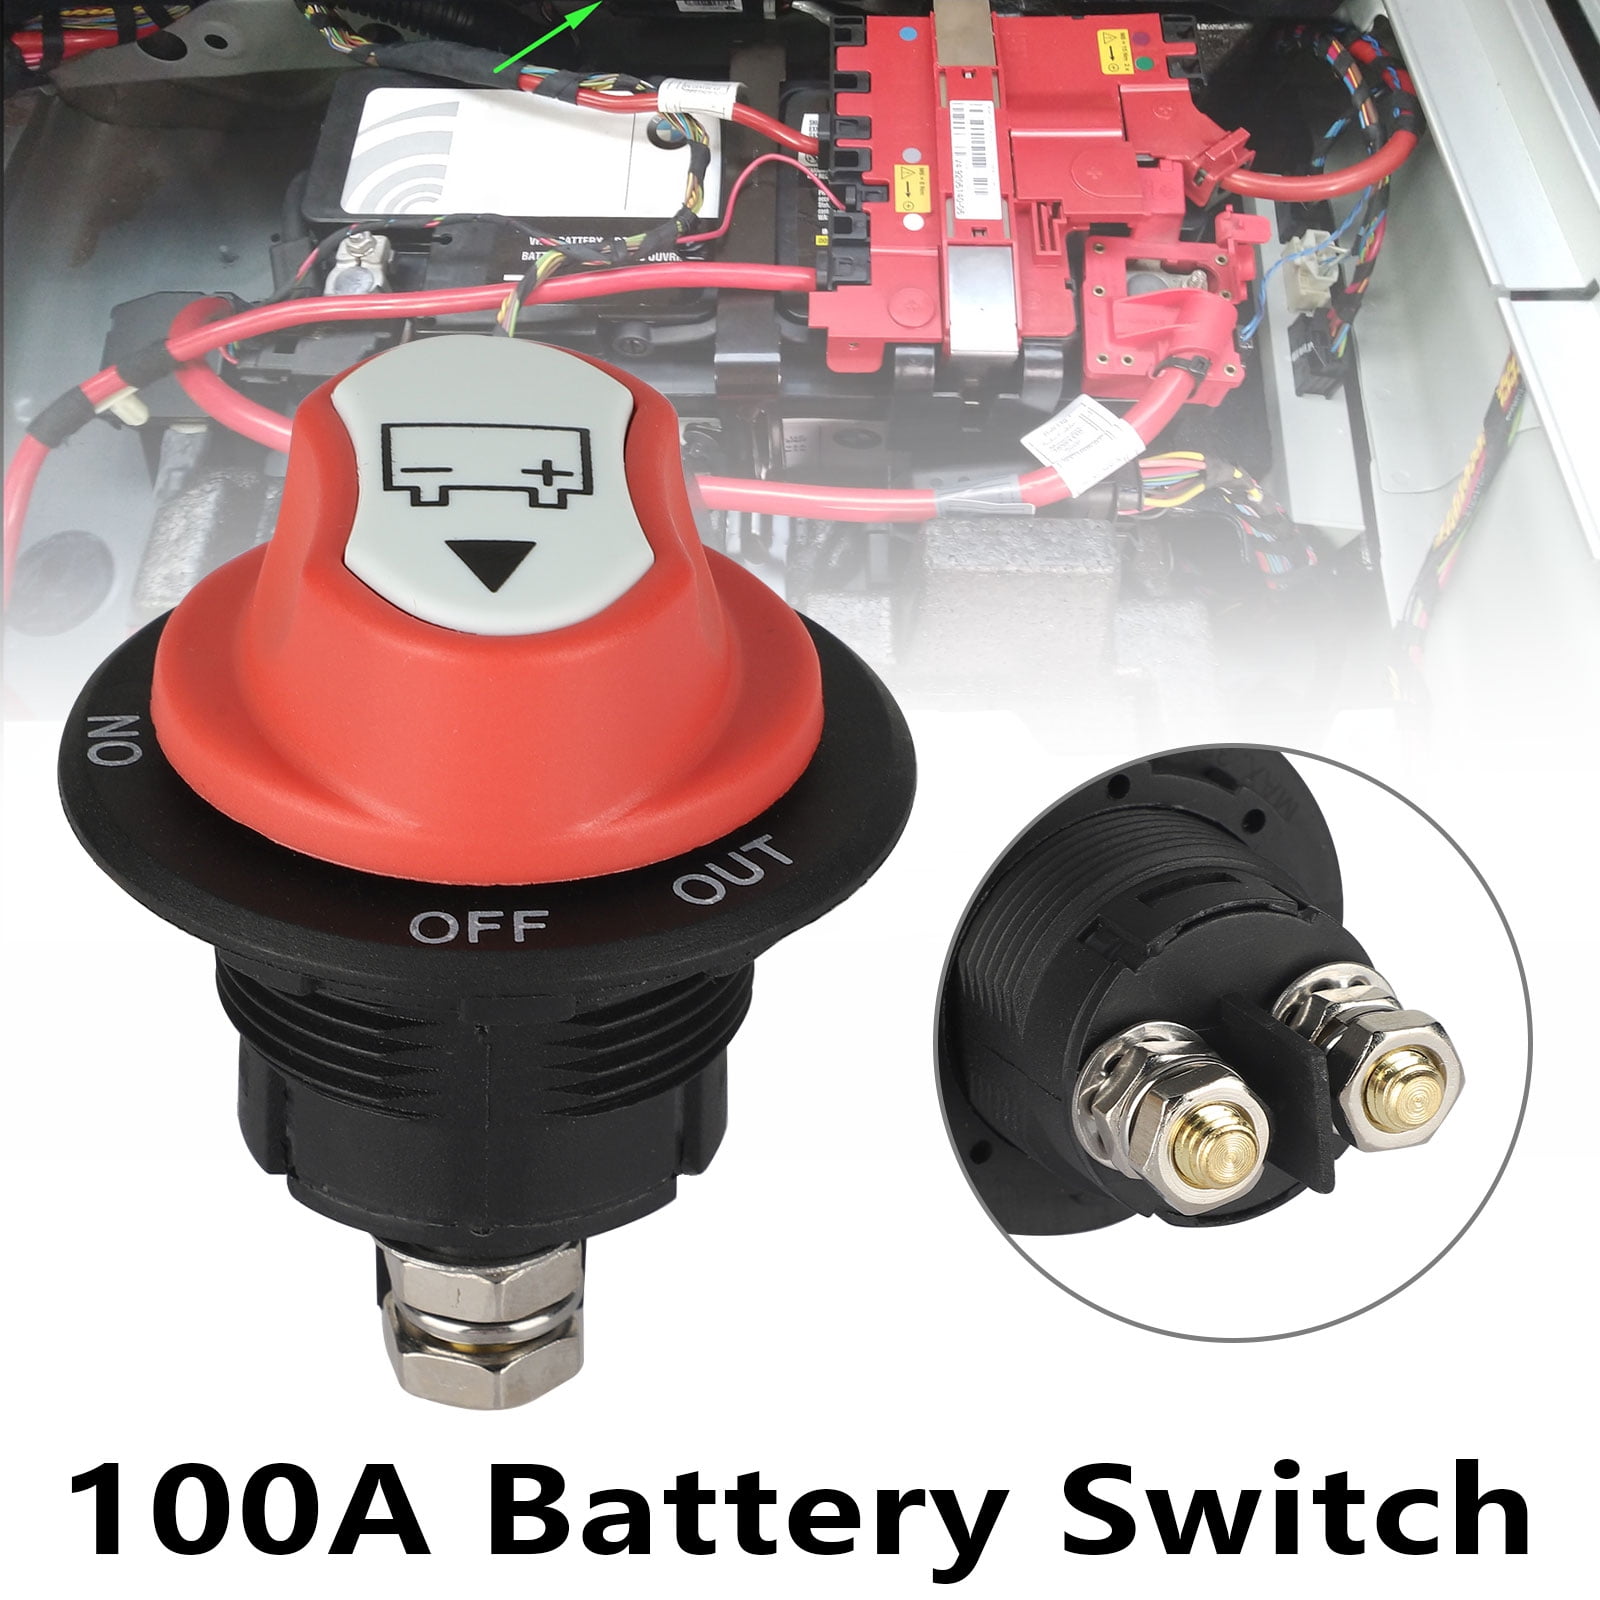 100 Amps Battery Isolator Cutoff Switch for Cars Motorcycles Caravans Trailers Boats 